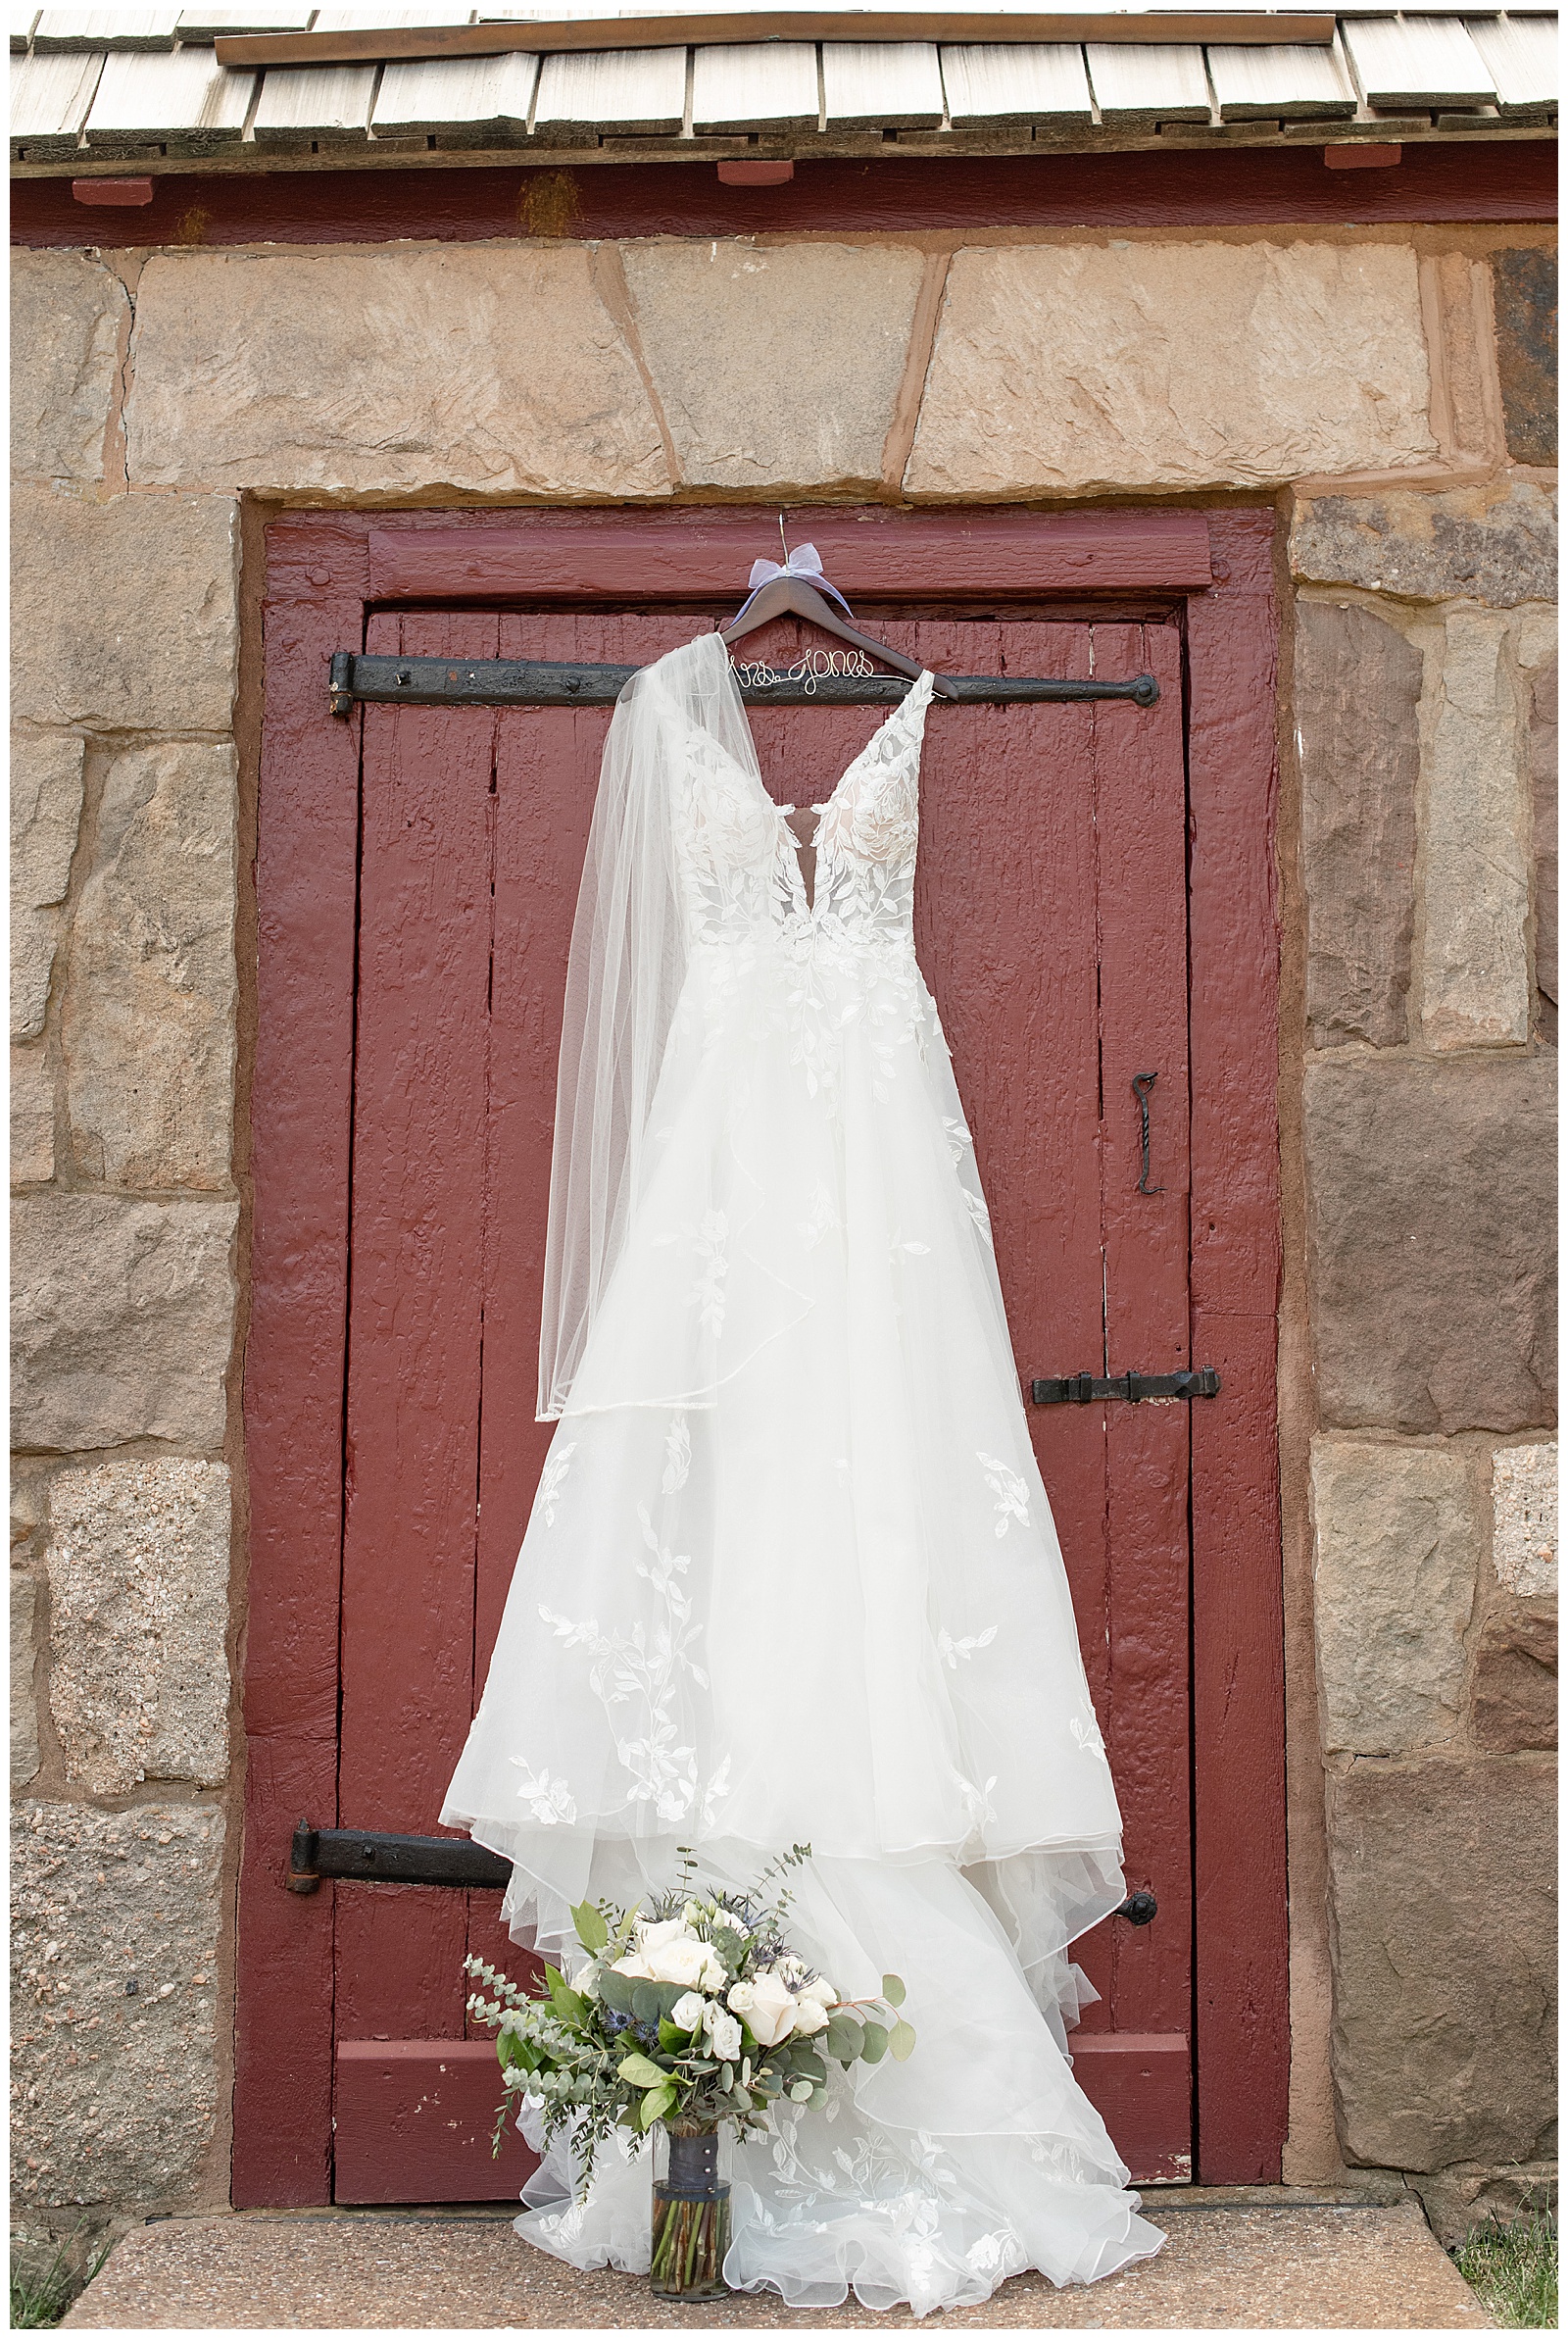 stunning white sleeveless v-neck wedding gown with white veil hanging in front of maroon barn door at elizabeth furnace